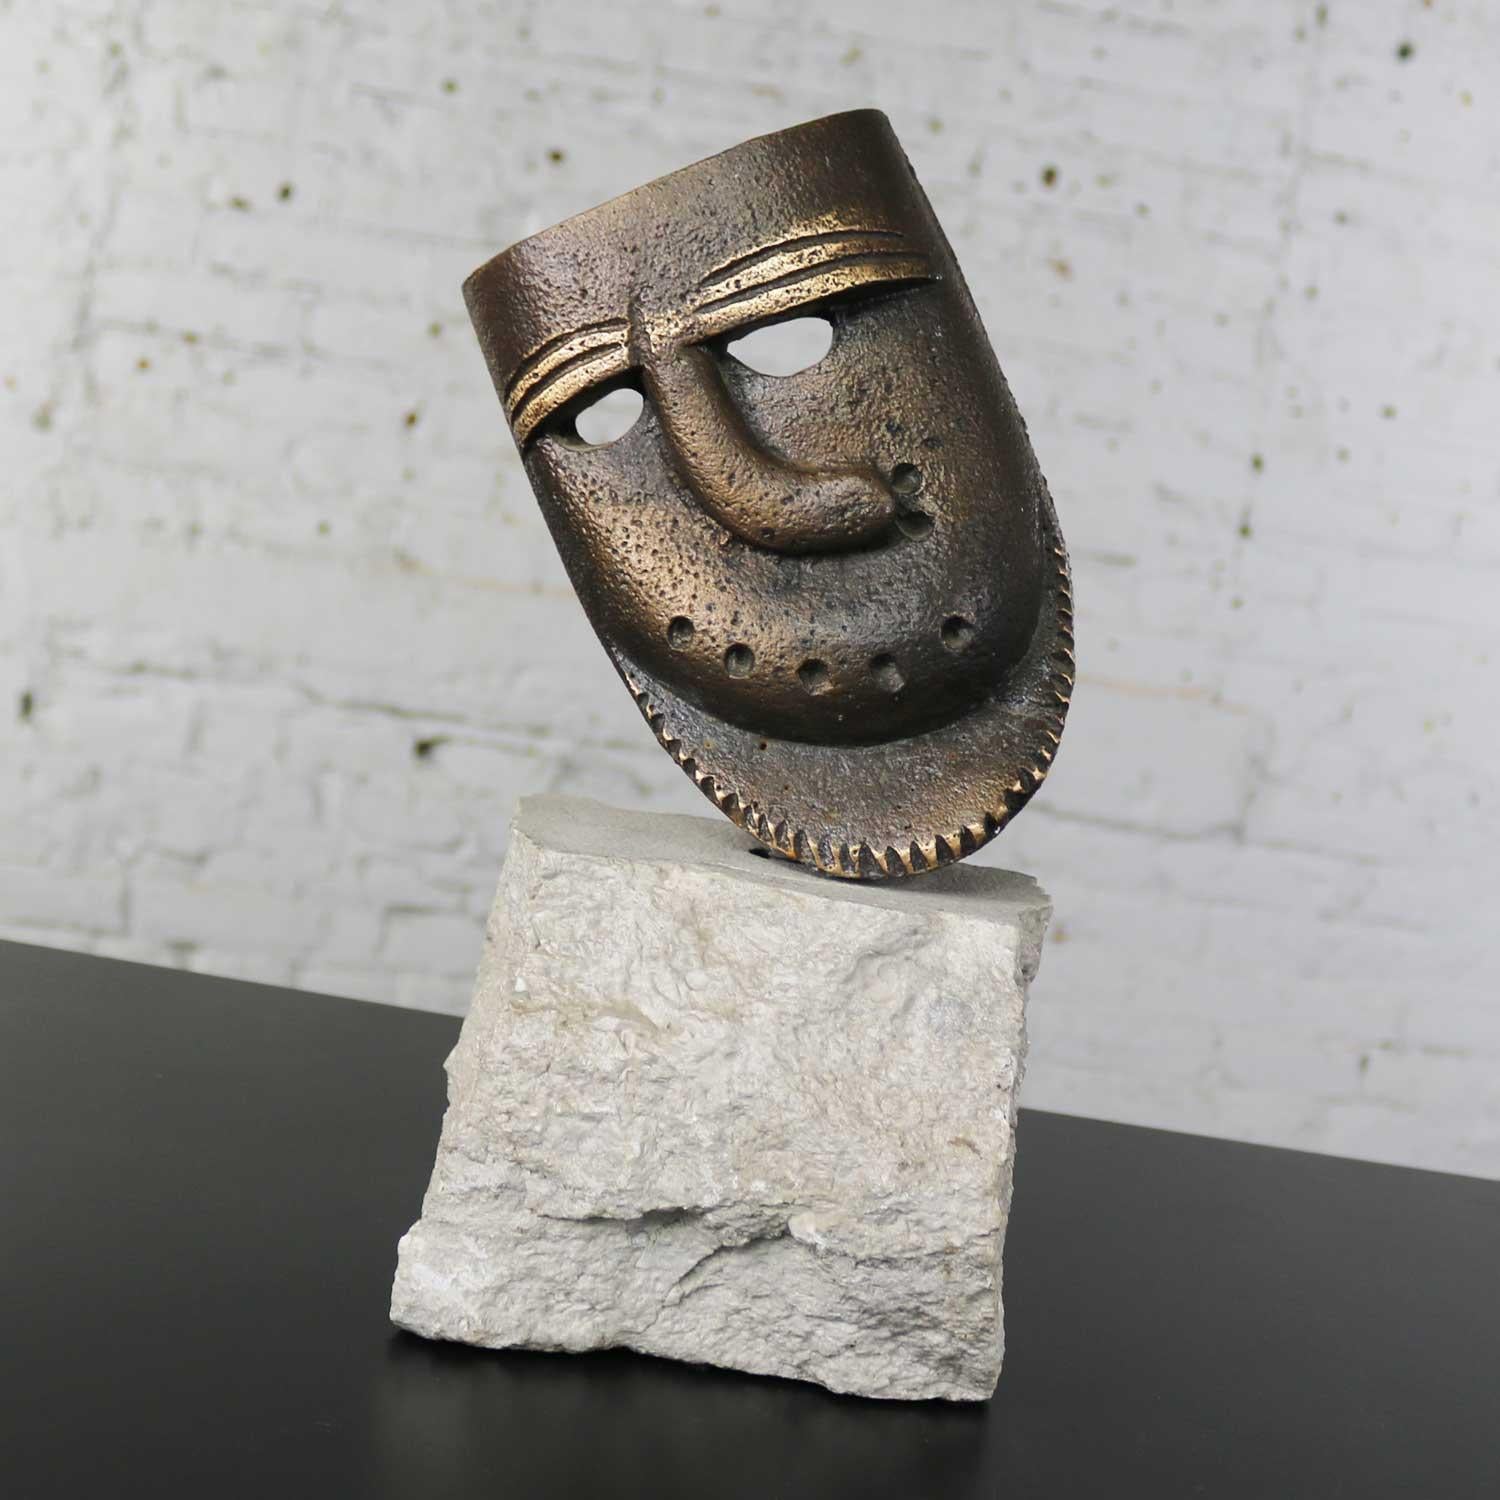 Handsome cast bronze sculpture of African mask with a crooked nose. It is mounted permanently on a chunk of cut limestone with natural edge. It is in fabulous vintage condition, circa 1990s.
What a handsome and interesting object d’art! It will